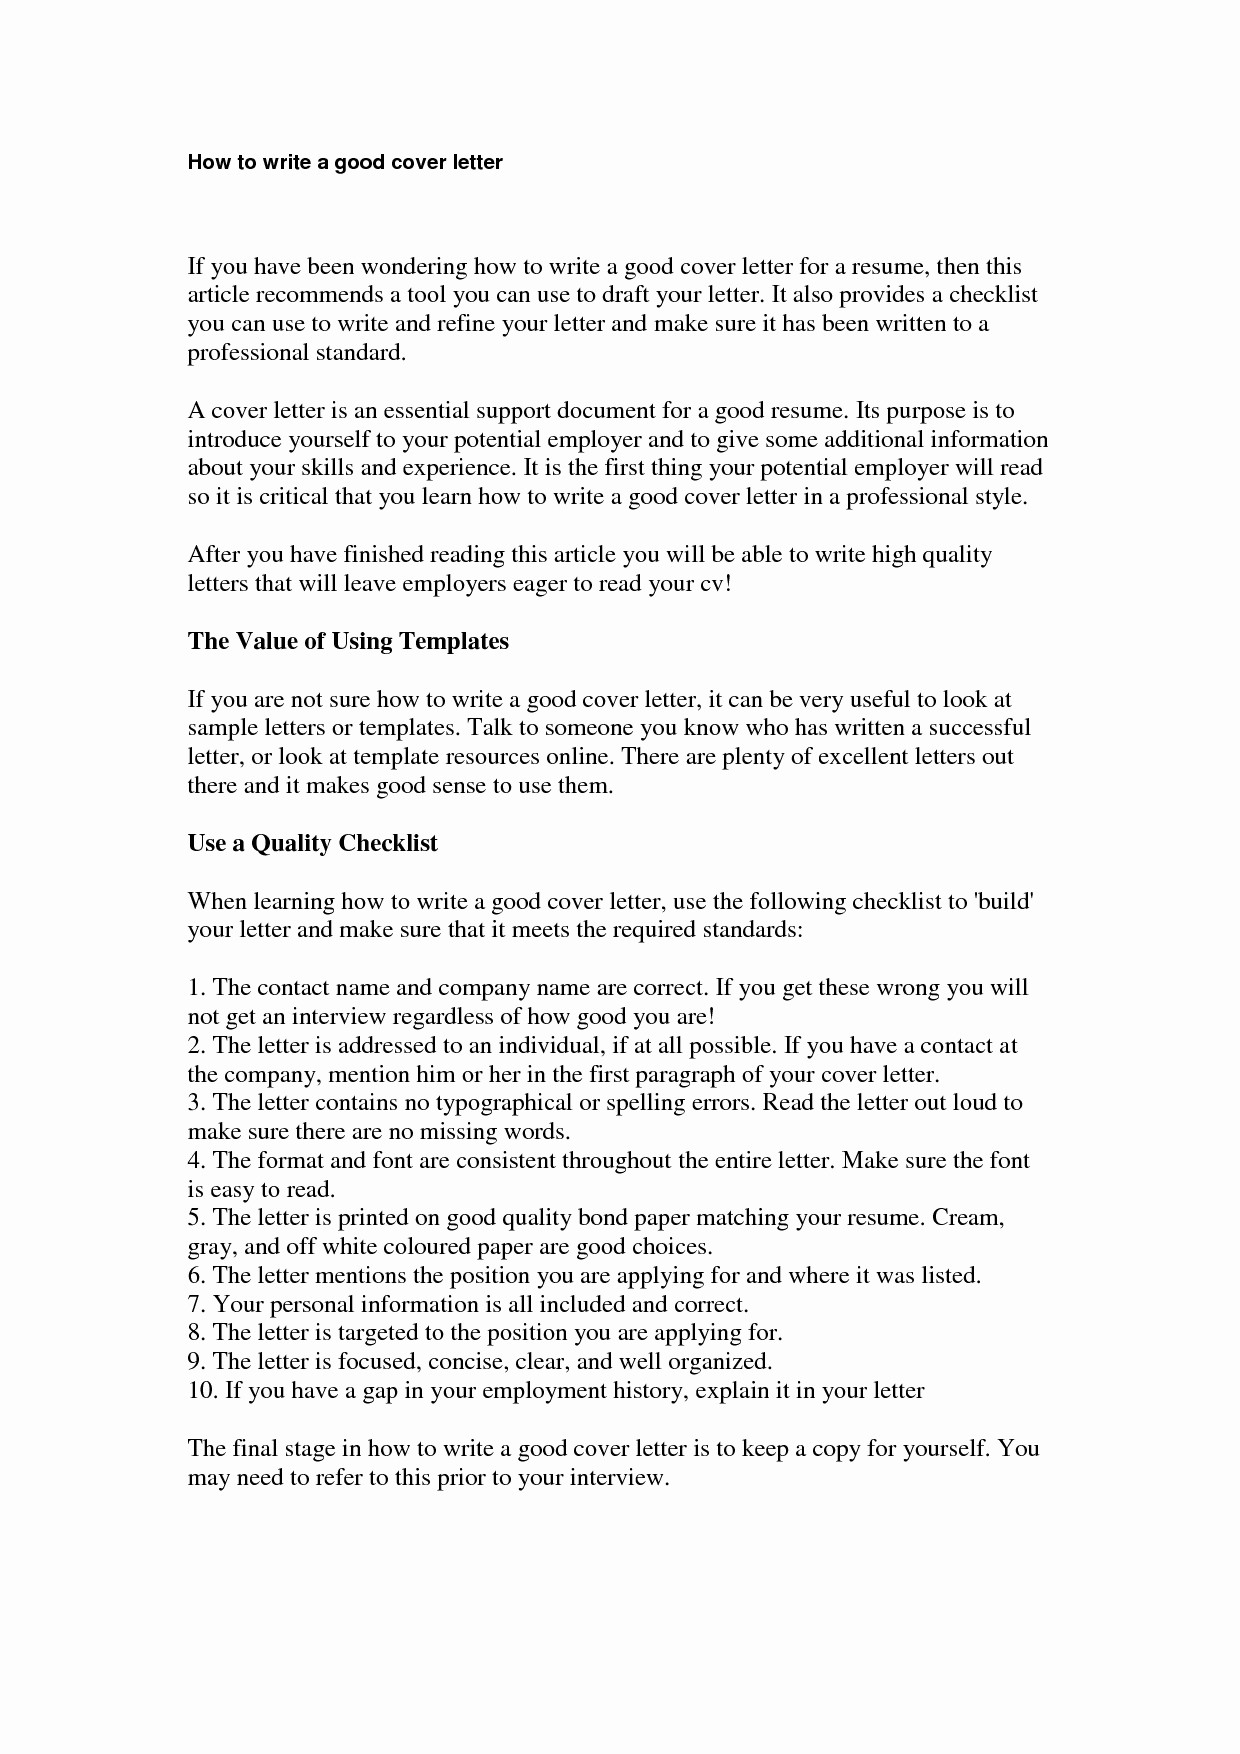 Professional Cover Letters for Resume Fresh How to Write A Good Cover Letter